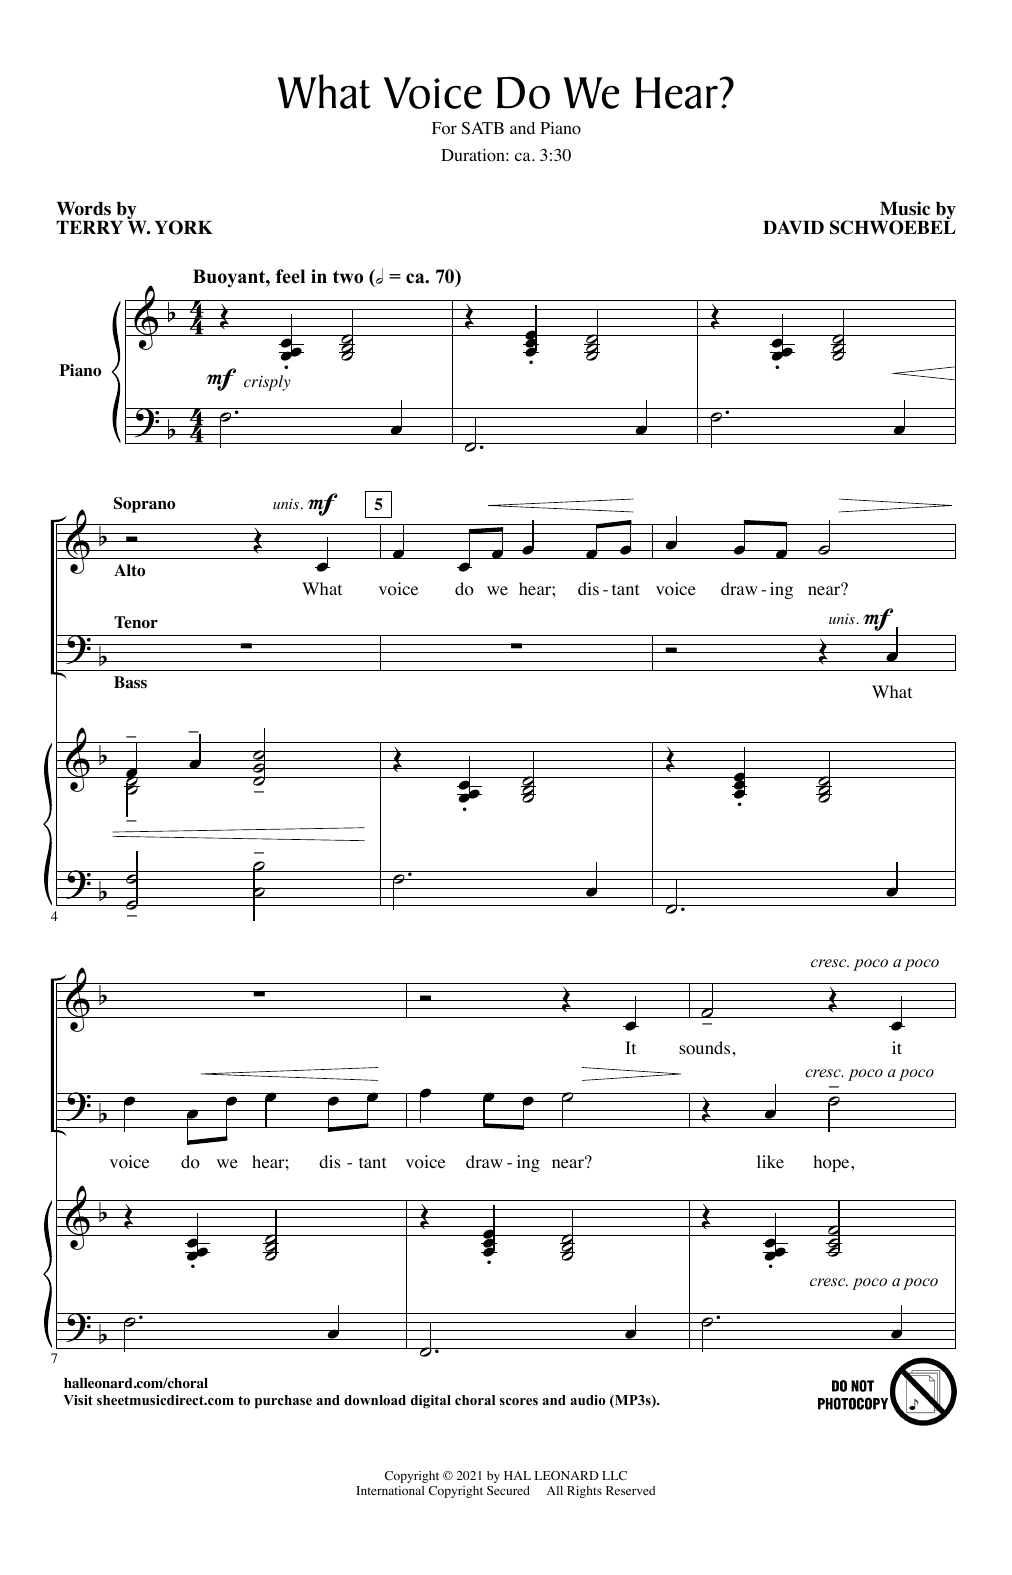 Download Terry W. York and David Schwoebel What Voice Do We Hear? Sheet Music